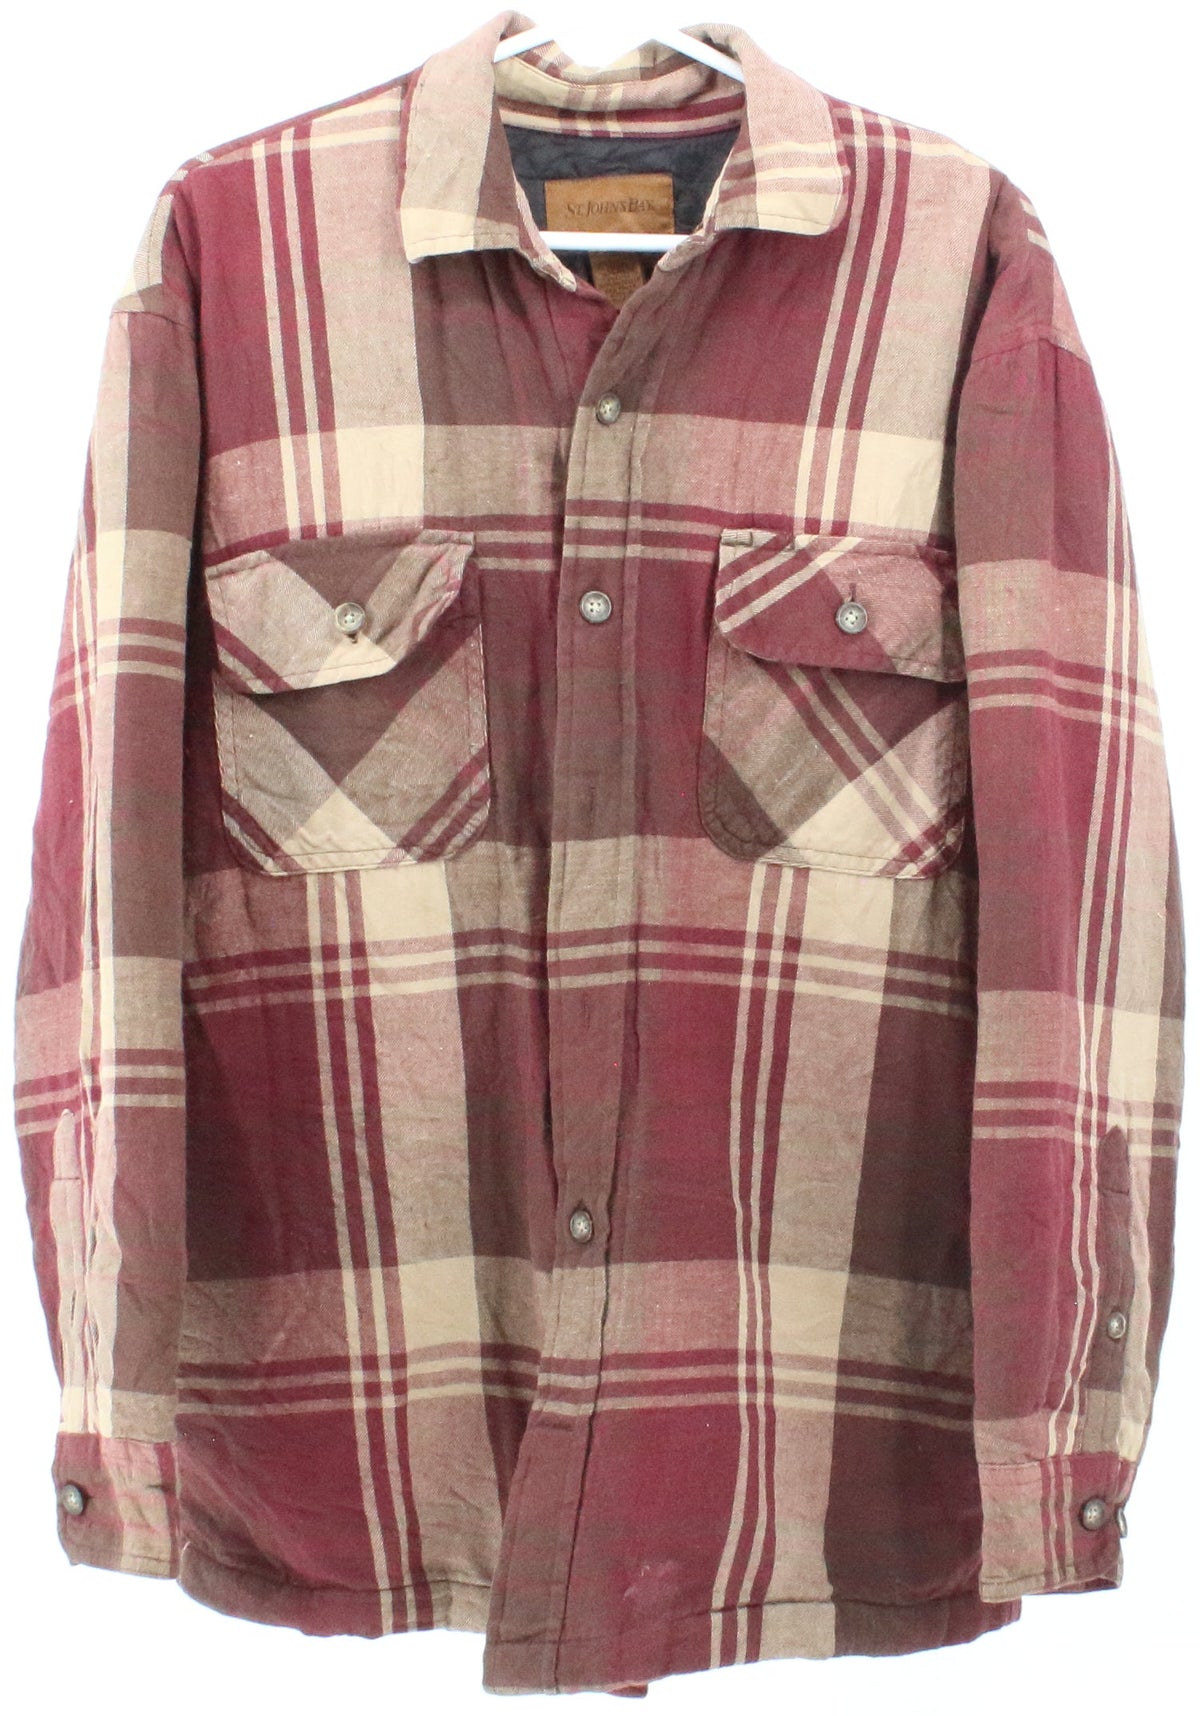 St John's Bay Burgundy and Beige Plaid Shirt With Quilt Lining